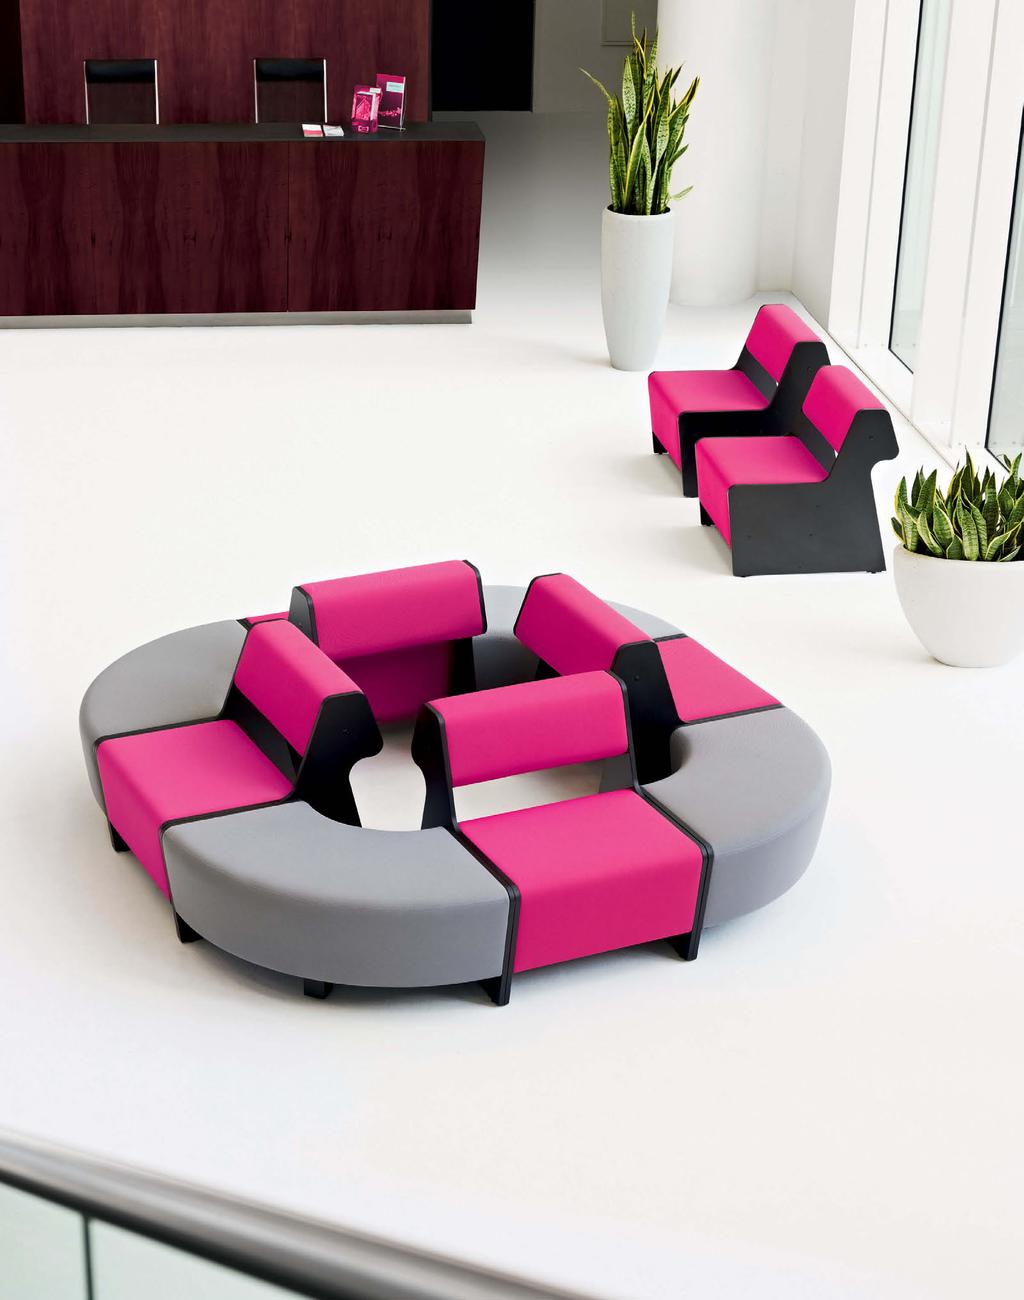 Modular Seating SySteMS Modułowe SySteMy SiedziSk Modulární SyStéMy Sedadel MagneS ii EN Modest, where they are intended to complement a space, or complex and extensive where designed as the dominant